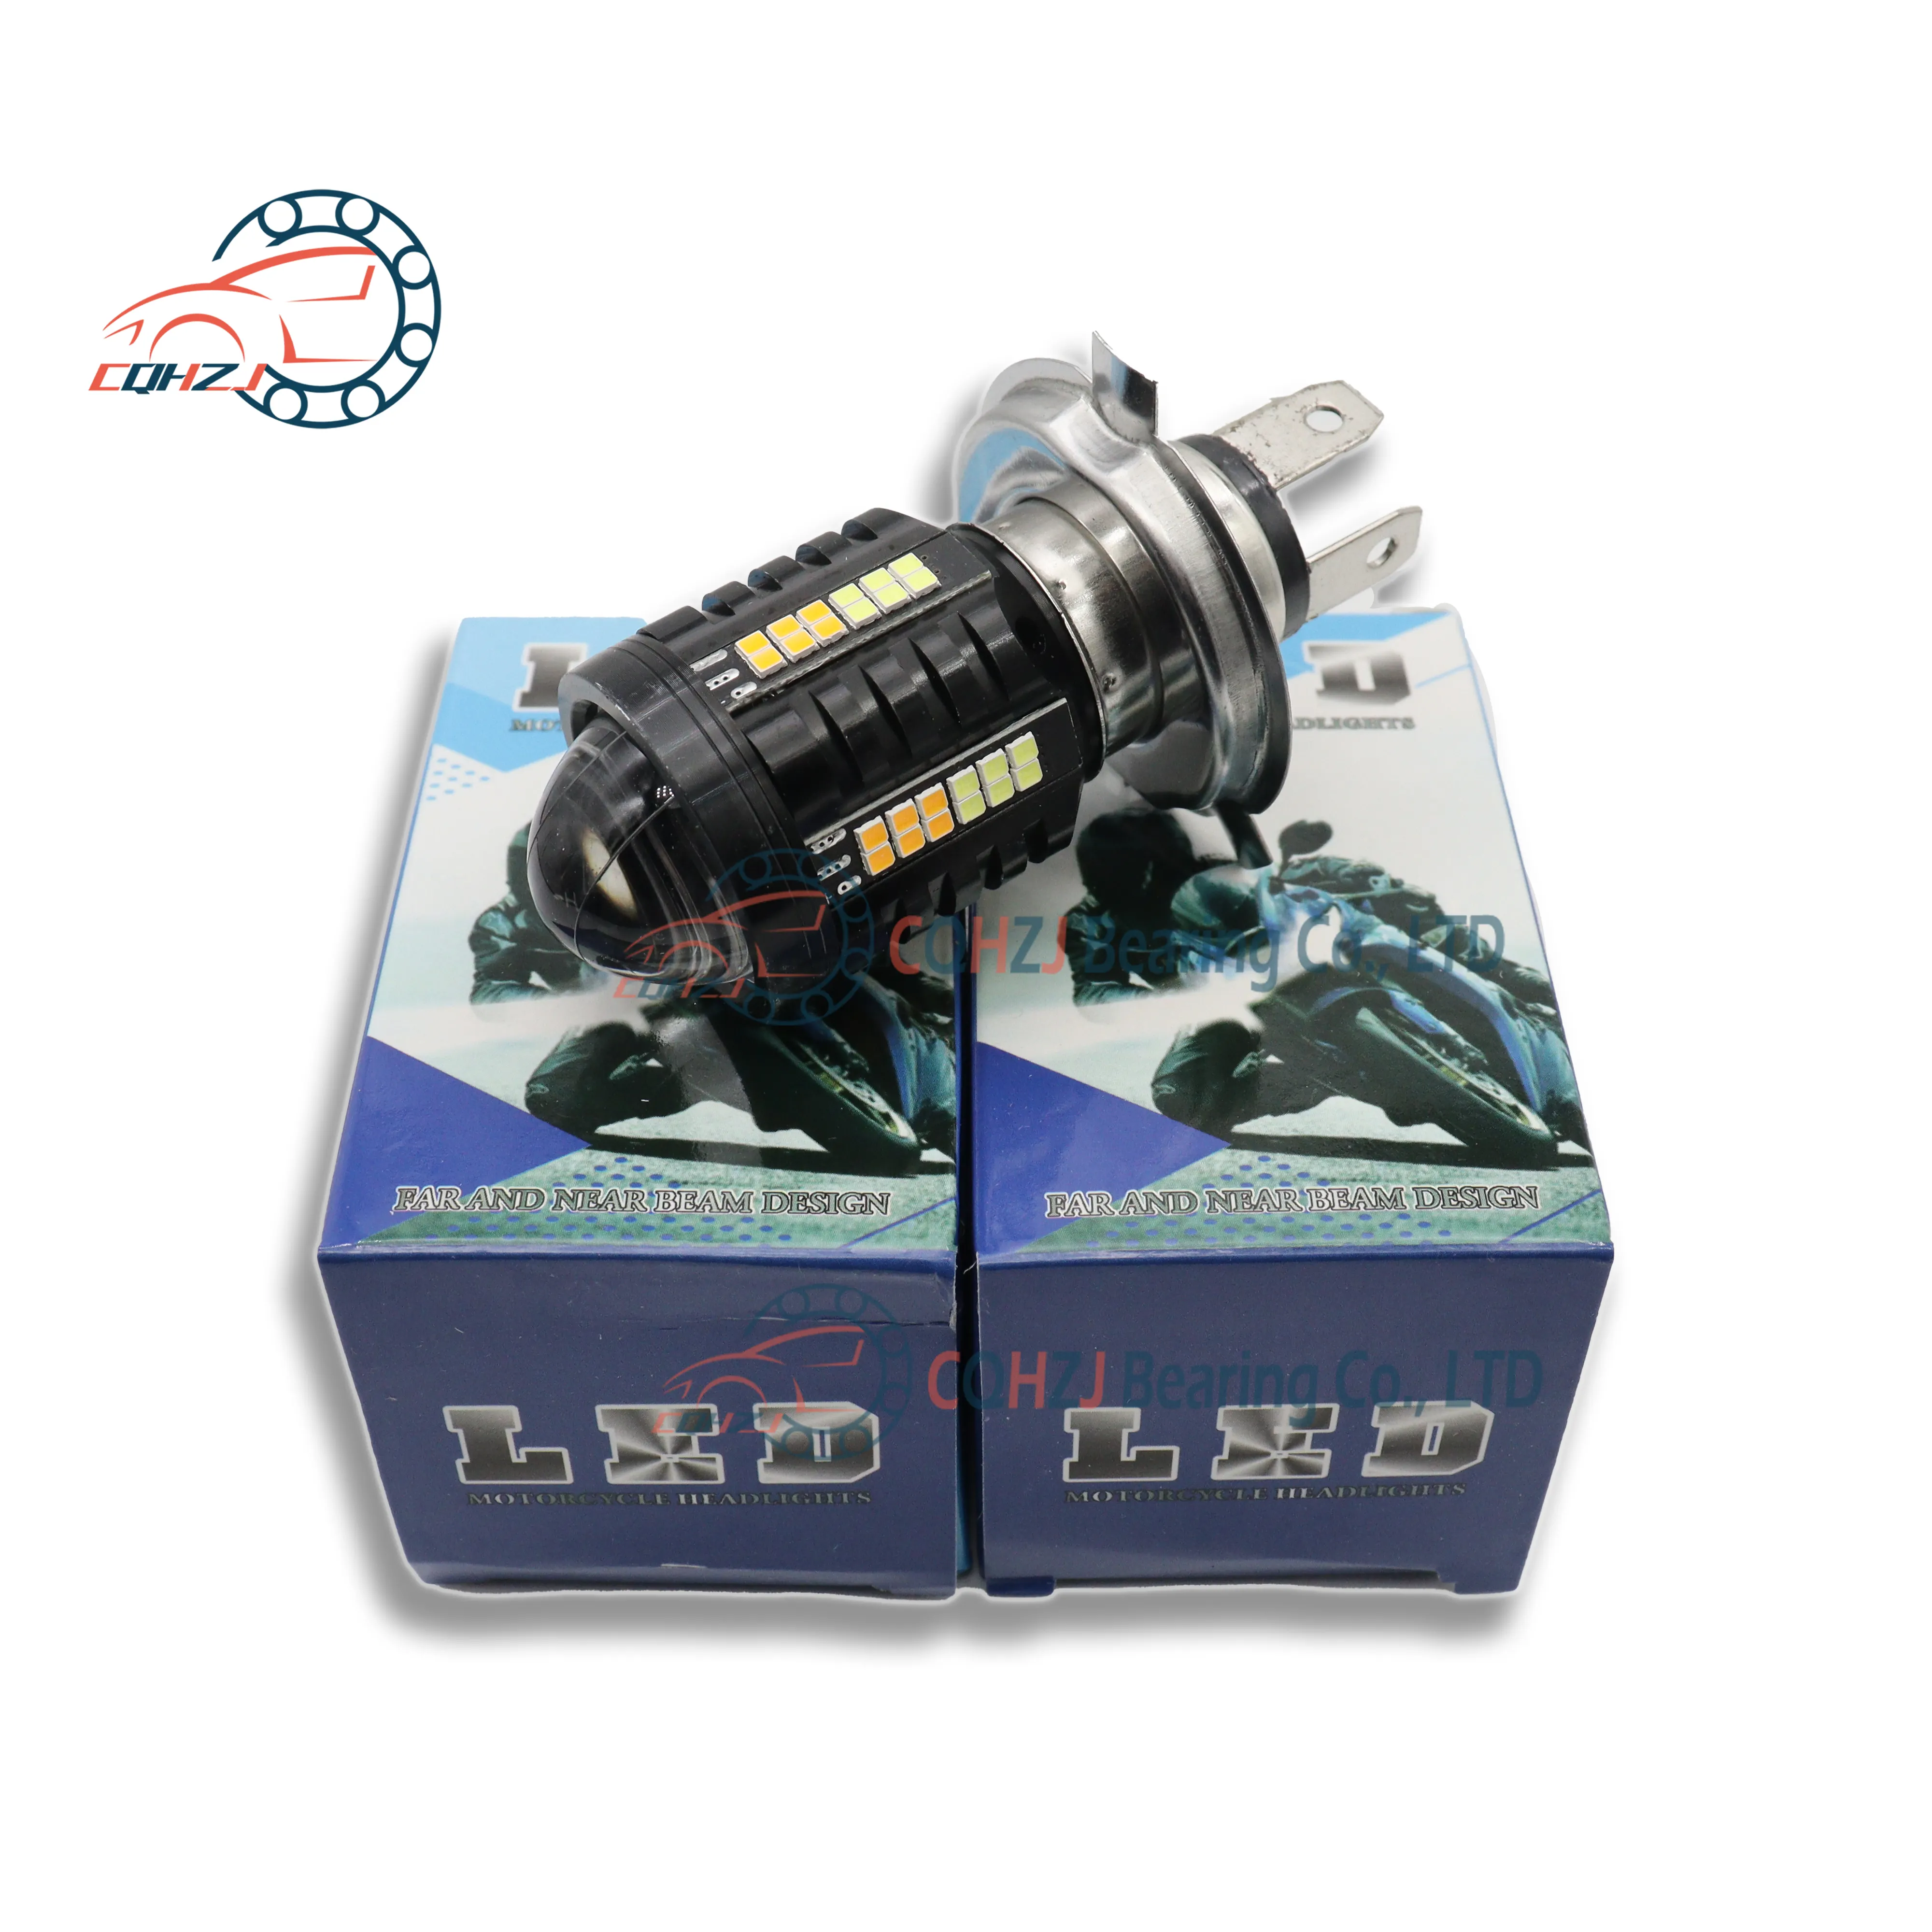 CQHZJ Wholesale Yellow And White Light H4 Led Headlight Para Focos High-low Light For Motorcycle